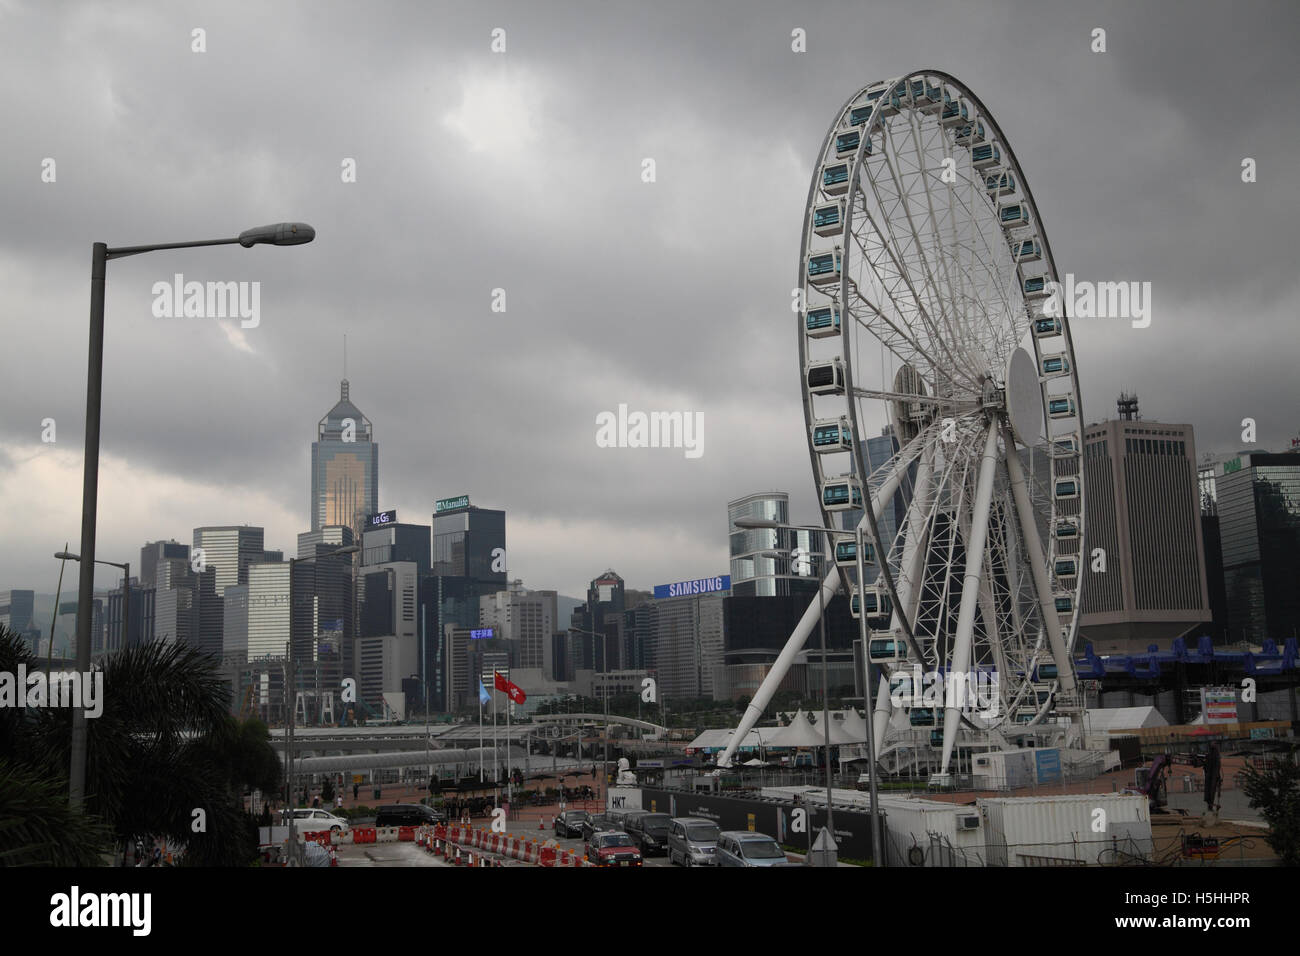 A yet unnamed giant wheel and the Hong Kong skyline of high rise commercial buildings, with the Central Plaza on the left Stock Photo